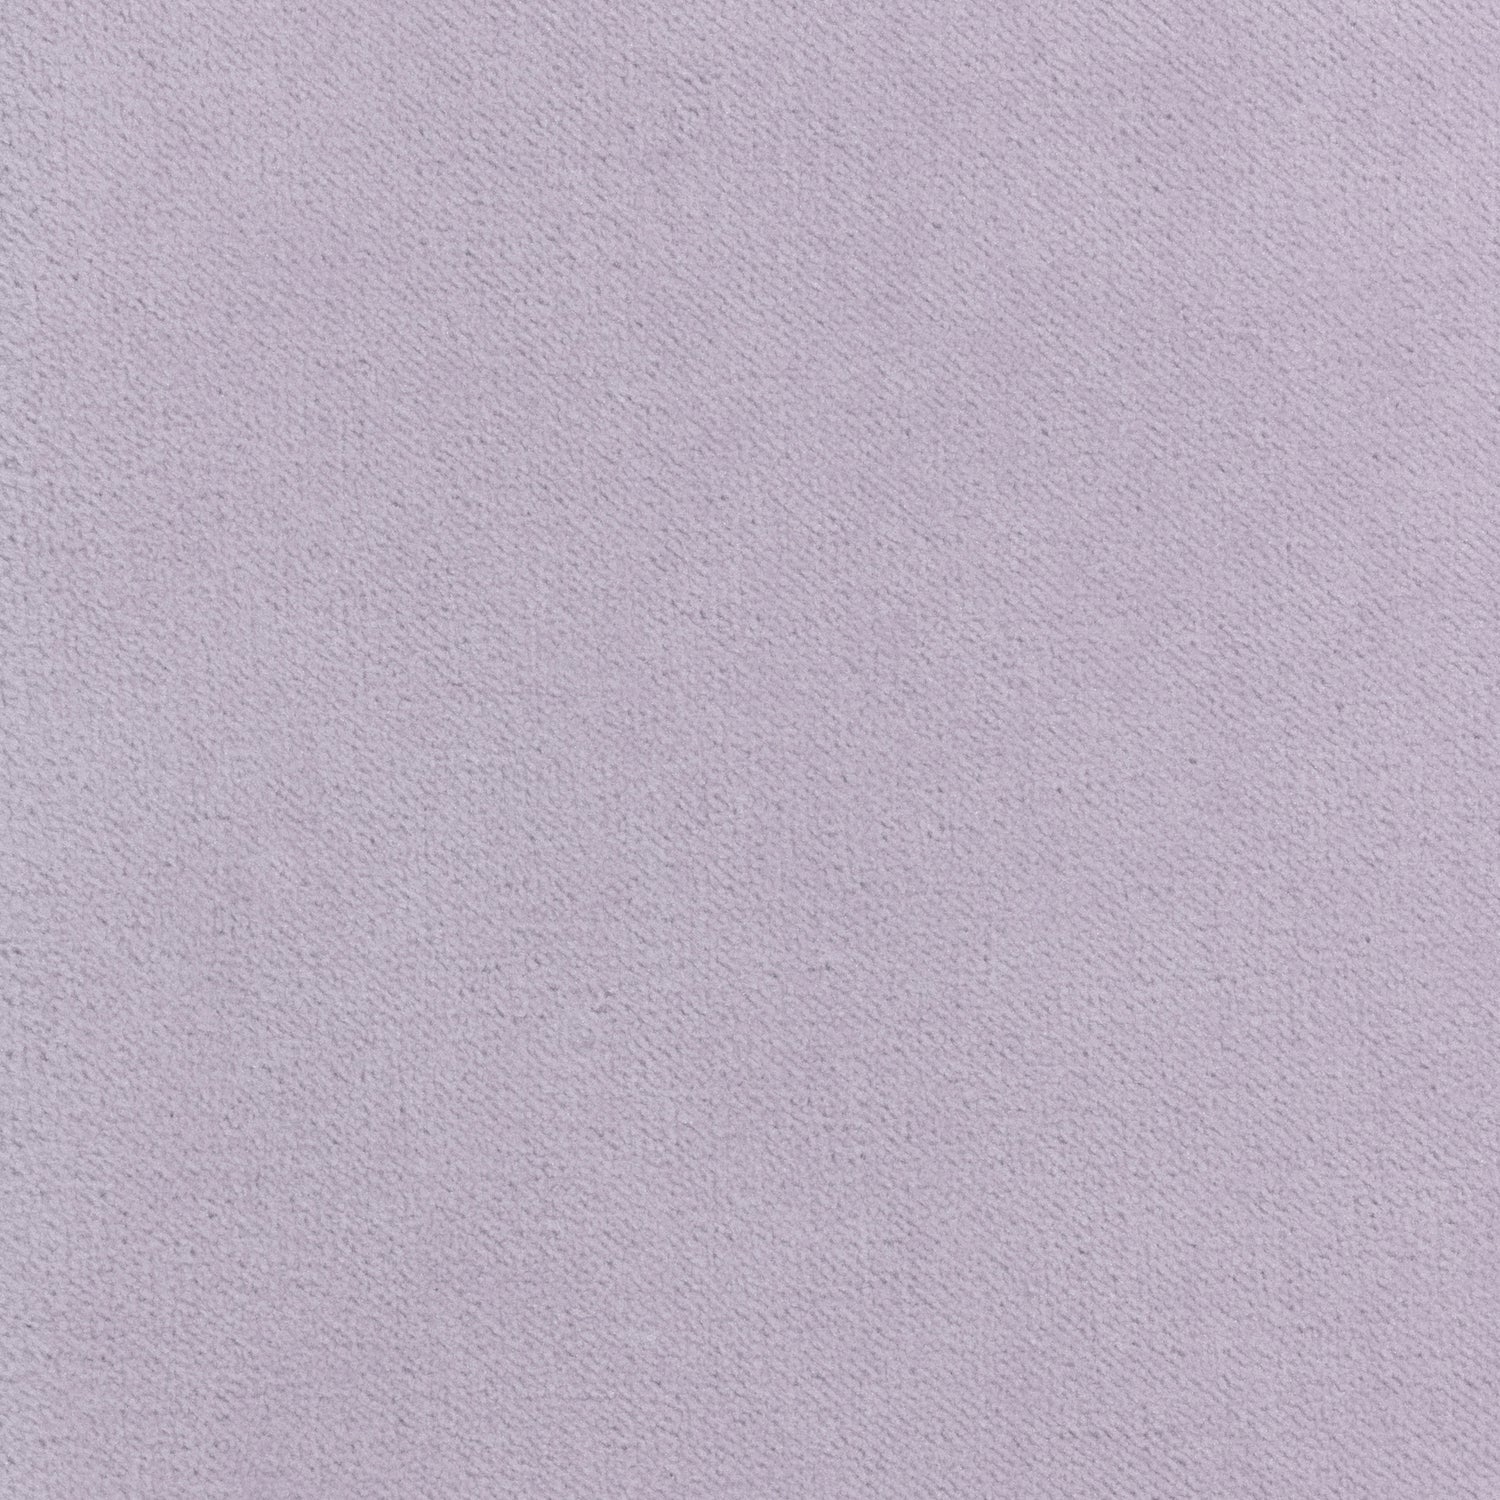 Club Velvet fabric in lilac color - pattern number W7214 - by Thibaut in the Club Velvet collection